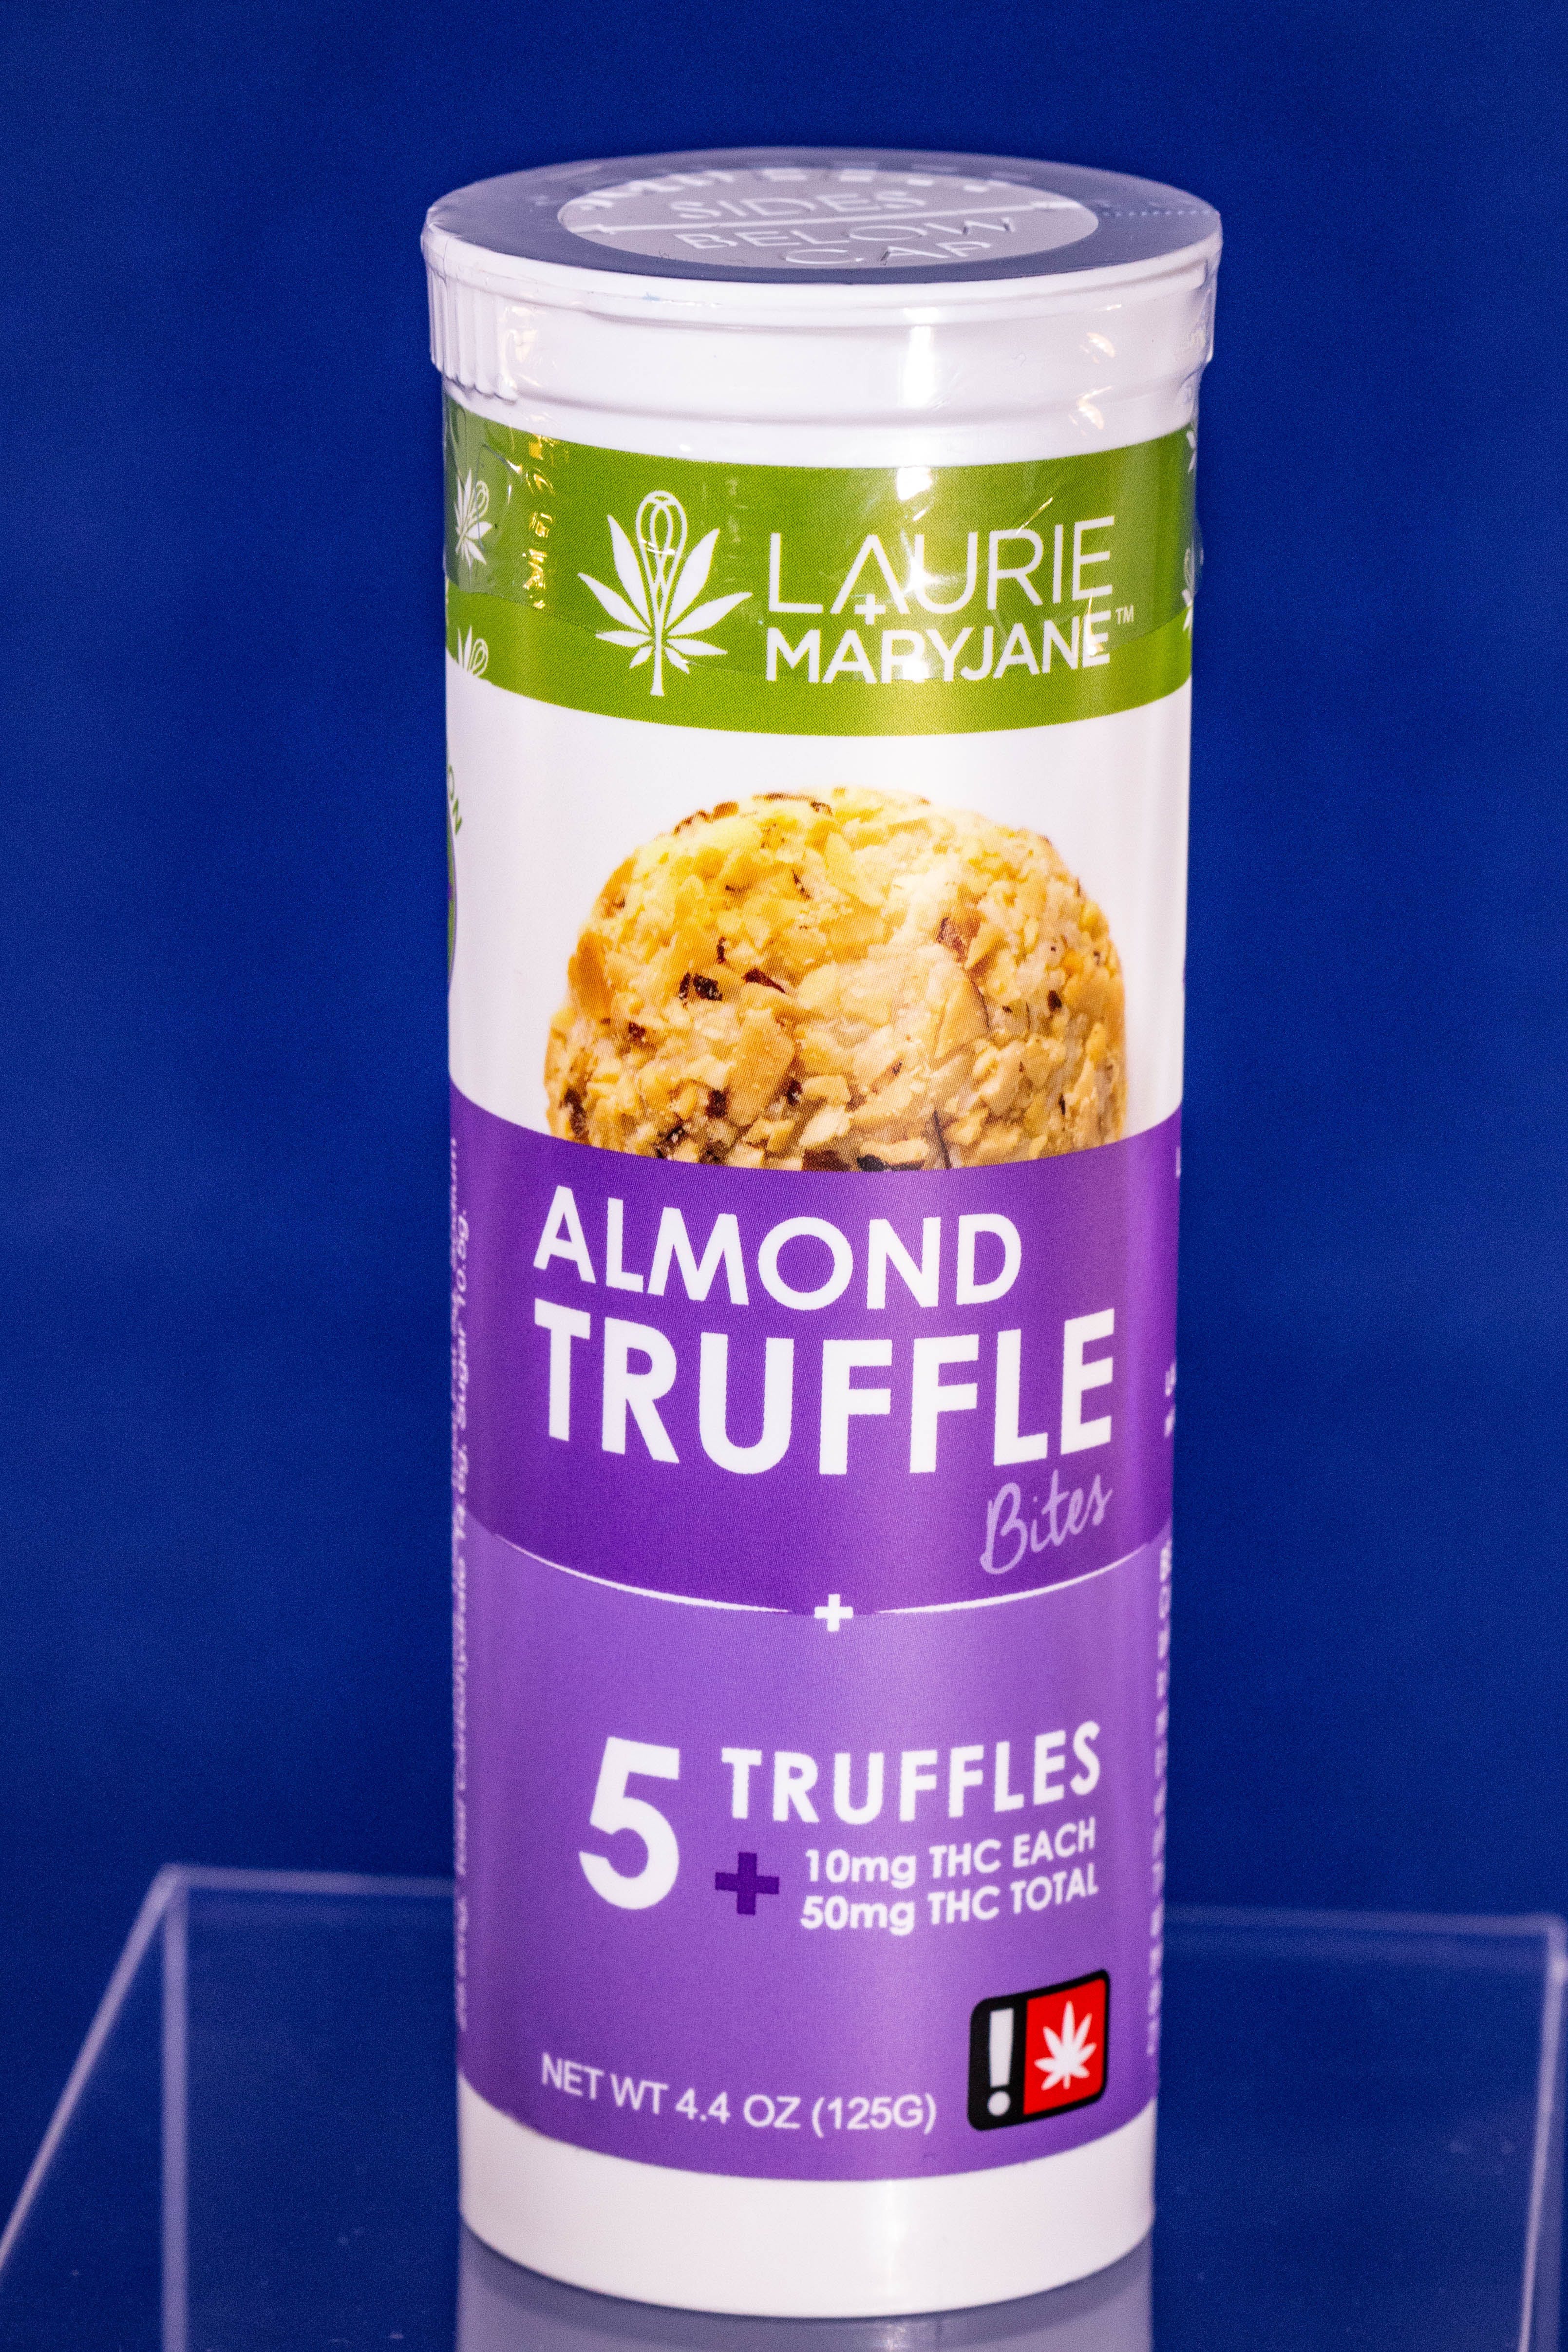 edible-almond-truffle-bites-by-laurie-2b-mary-janes